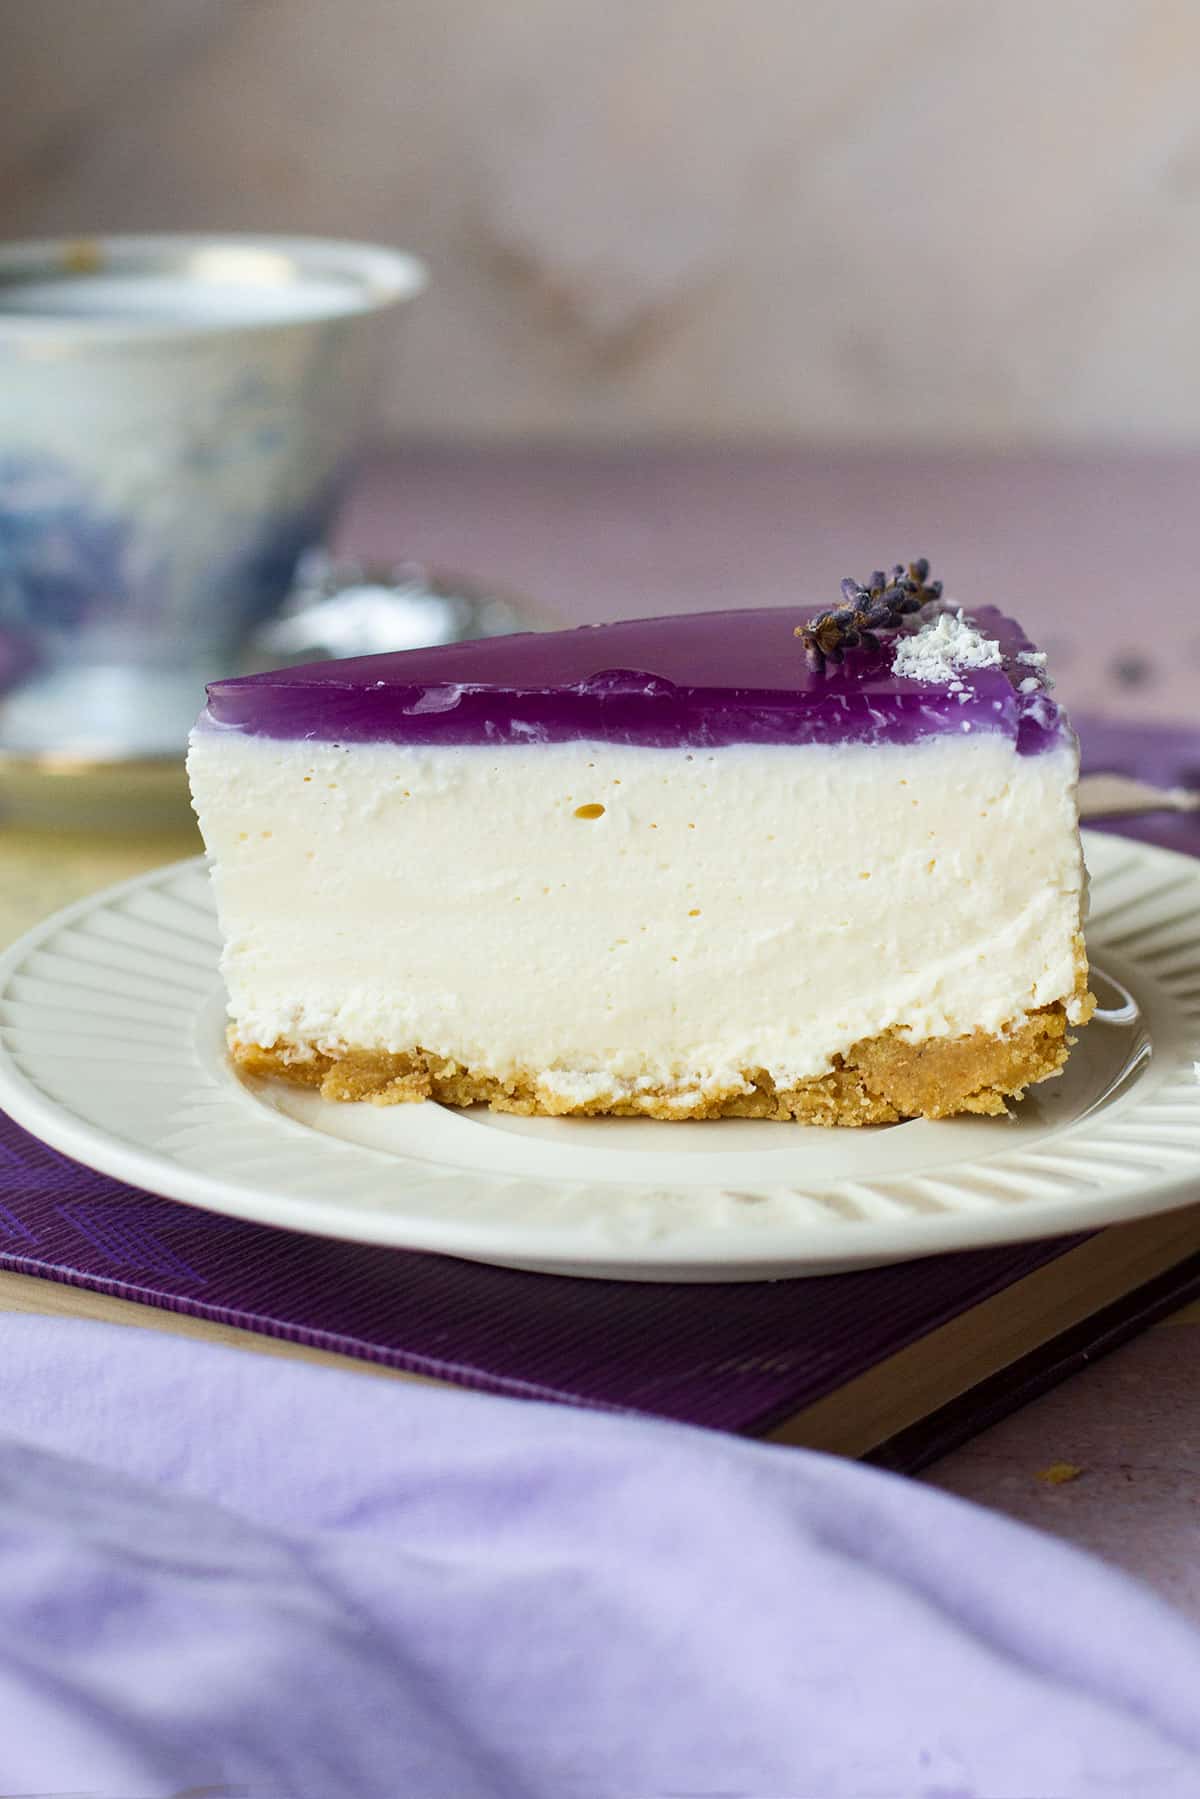 A slice of cheesecake seen from the side.